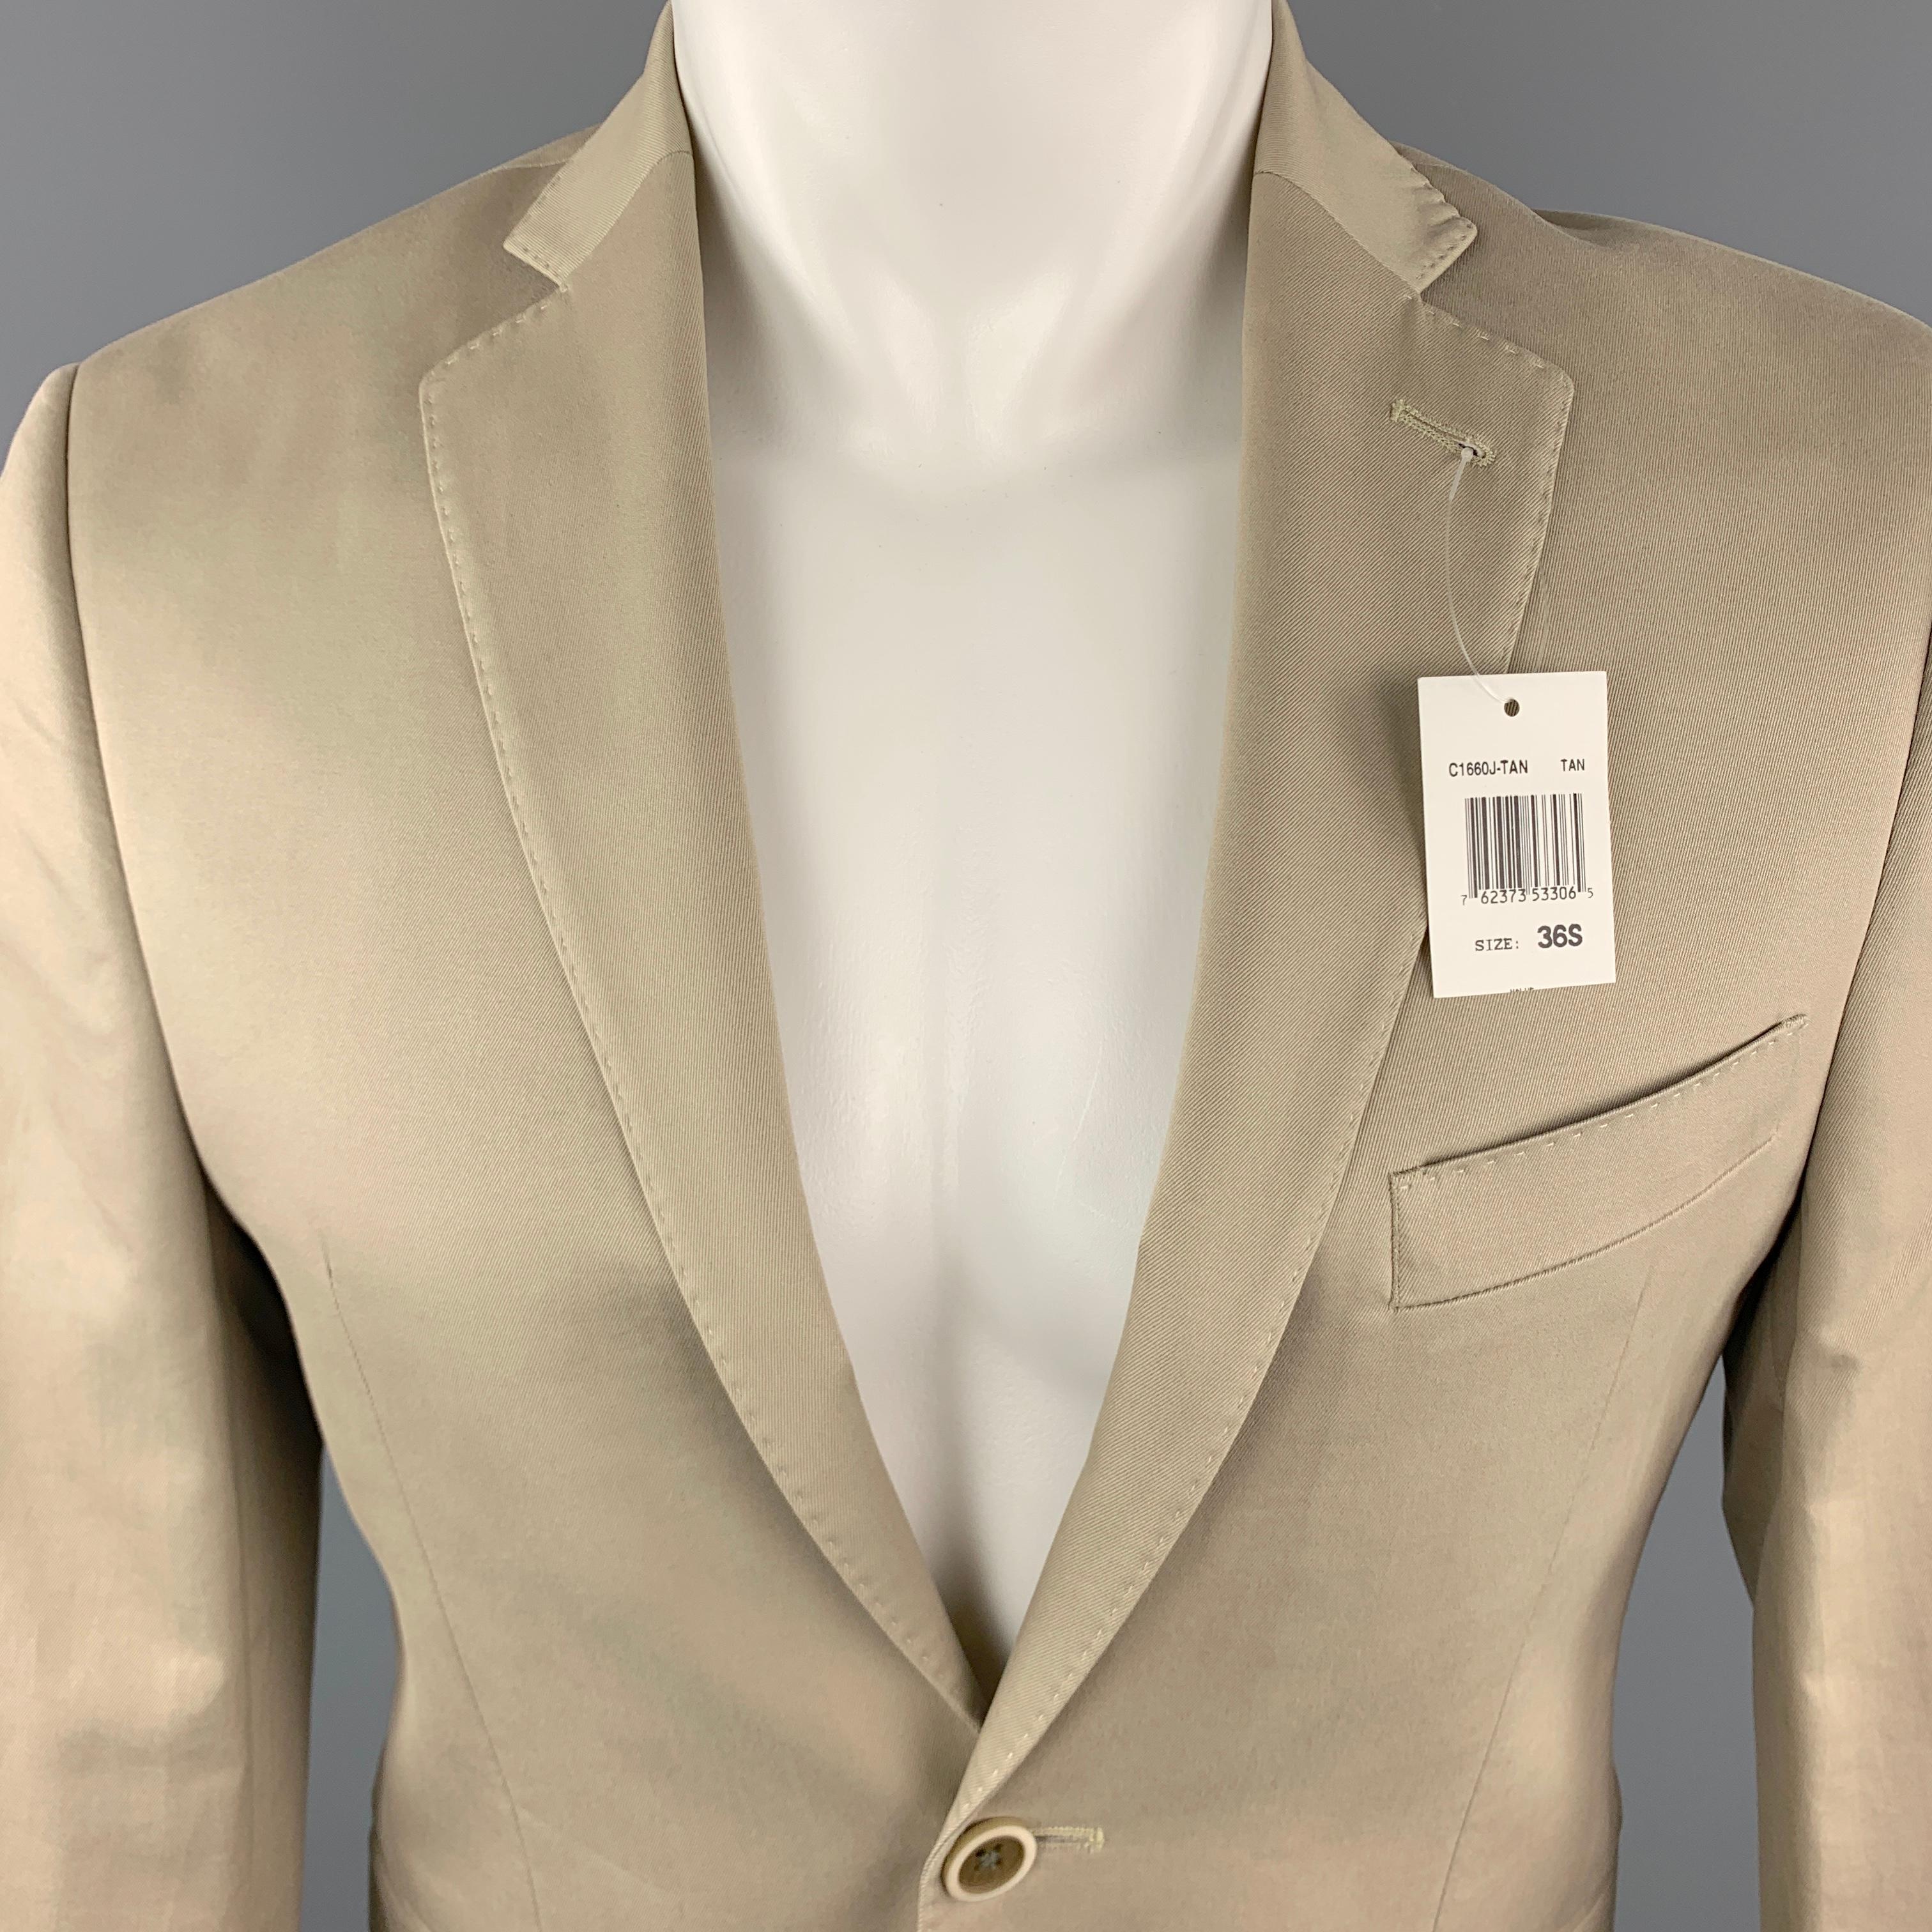 SAKS FIFTH AVENUE Sport Coat Jacket comes in a khaki tone in a solid cotton material, with a notch lapel, slit pockets, two buttons at closure, single breasted, buttoned cuffs, internal pockets, a double vent at back, unlined.  

New with